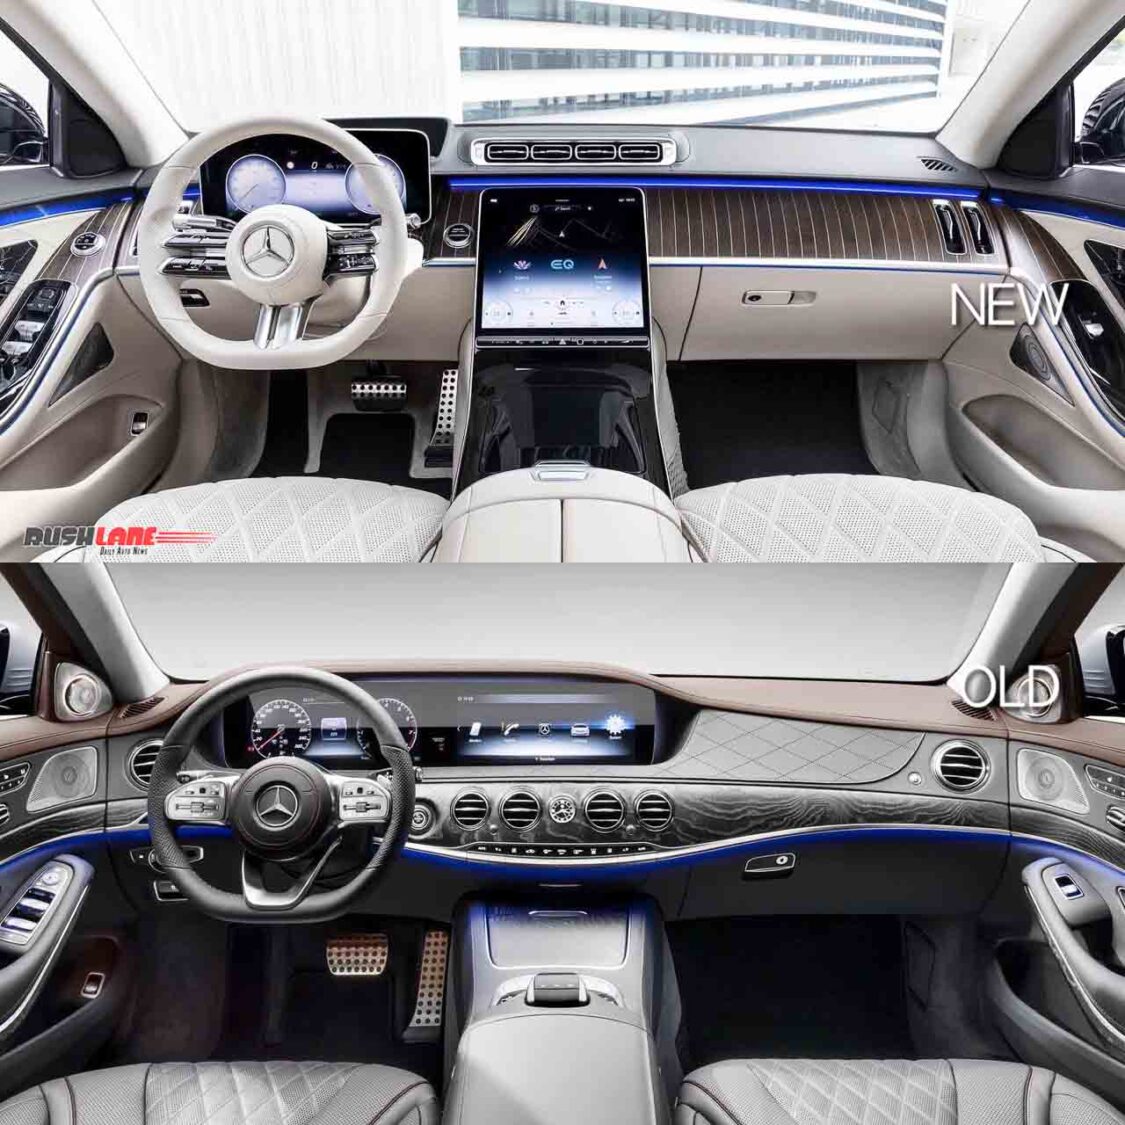 In the glb, you choose the shape your comfort takes. 2021 Mercedes S Class Old vs New - Exteriors and Interiors